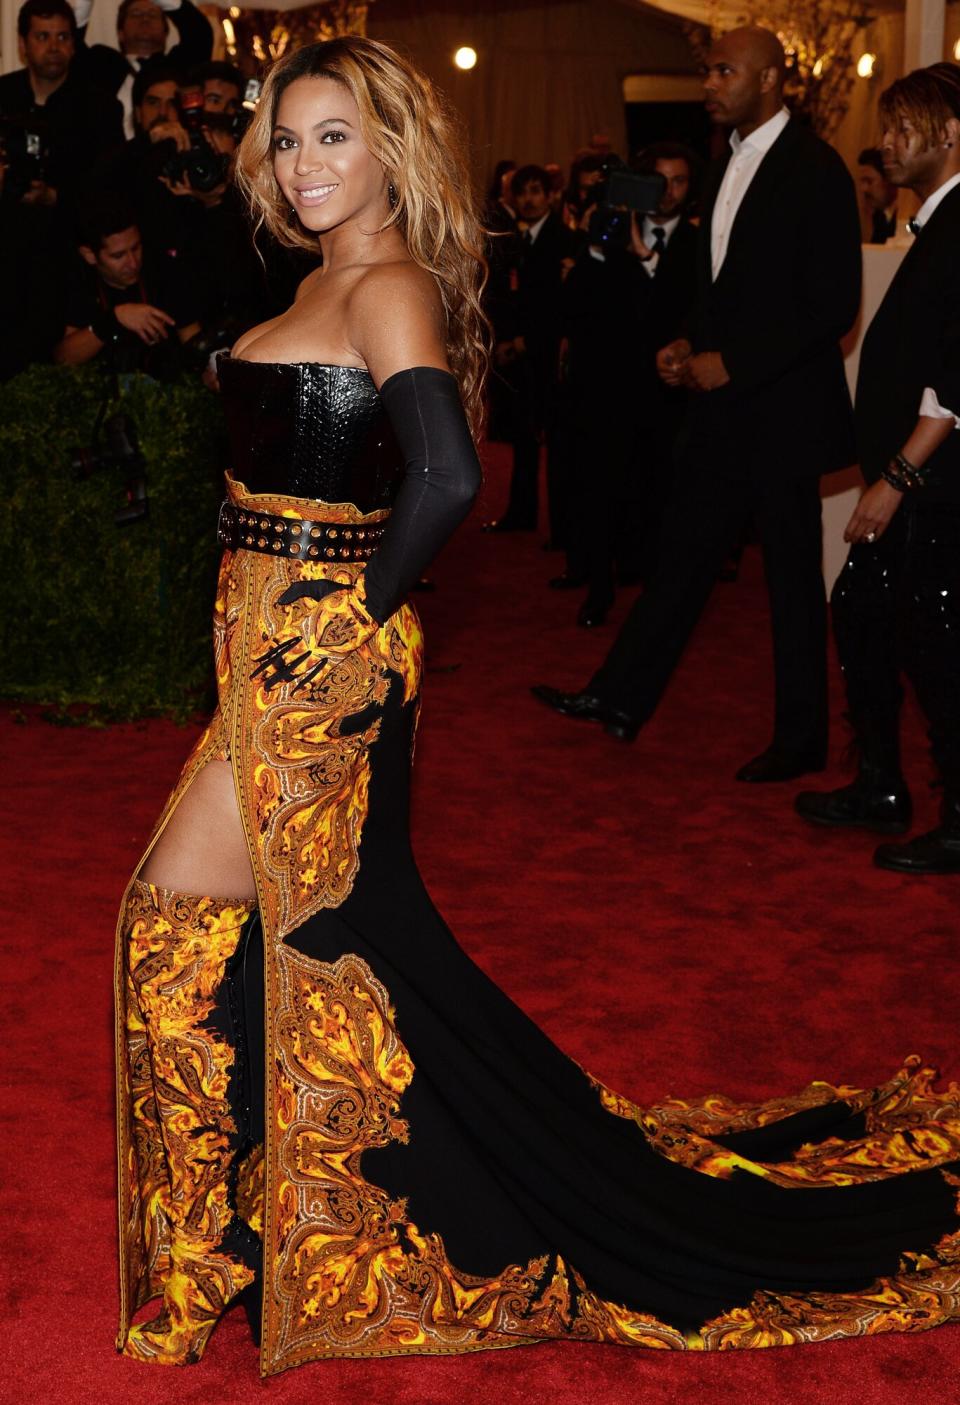 Beyonce attends the Costume Institute Gala for the "PUNK: Chaos to Couture" exhibition at the Metropolitan Museum of Art on May 6, 2013 in New York City